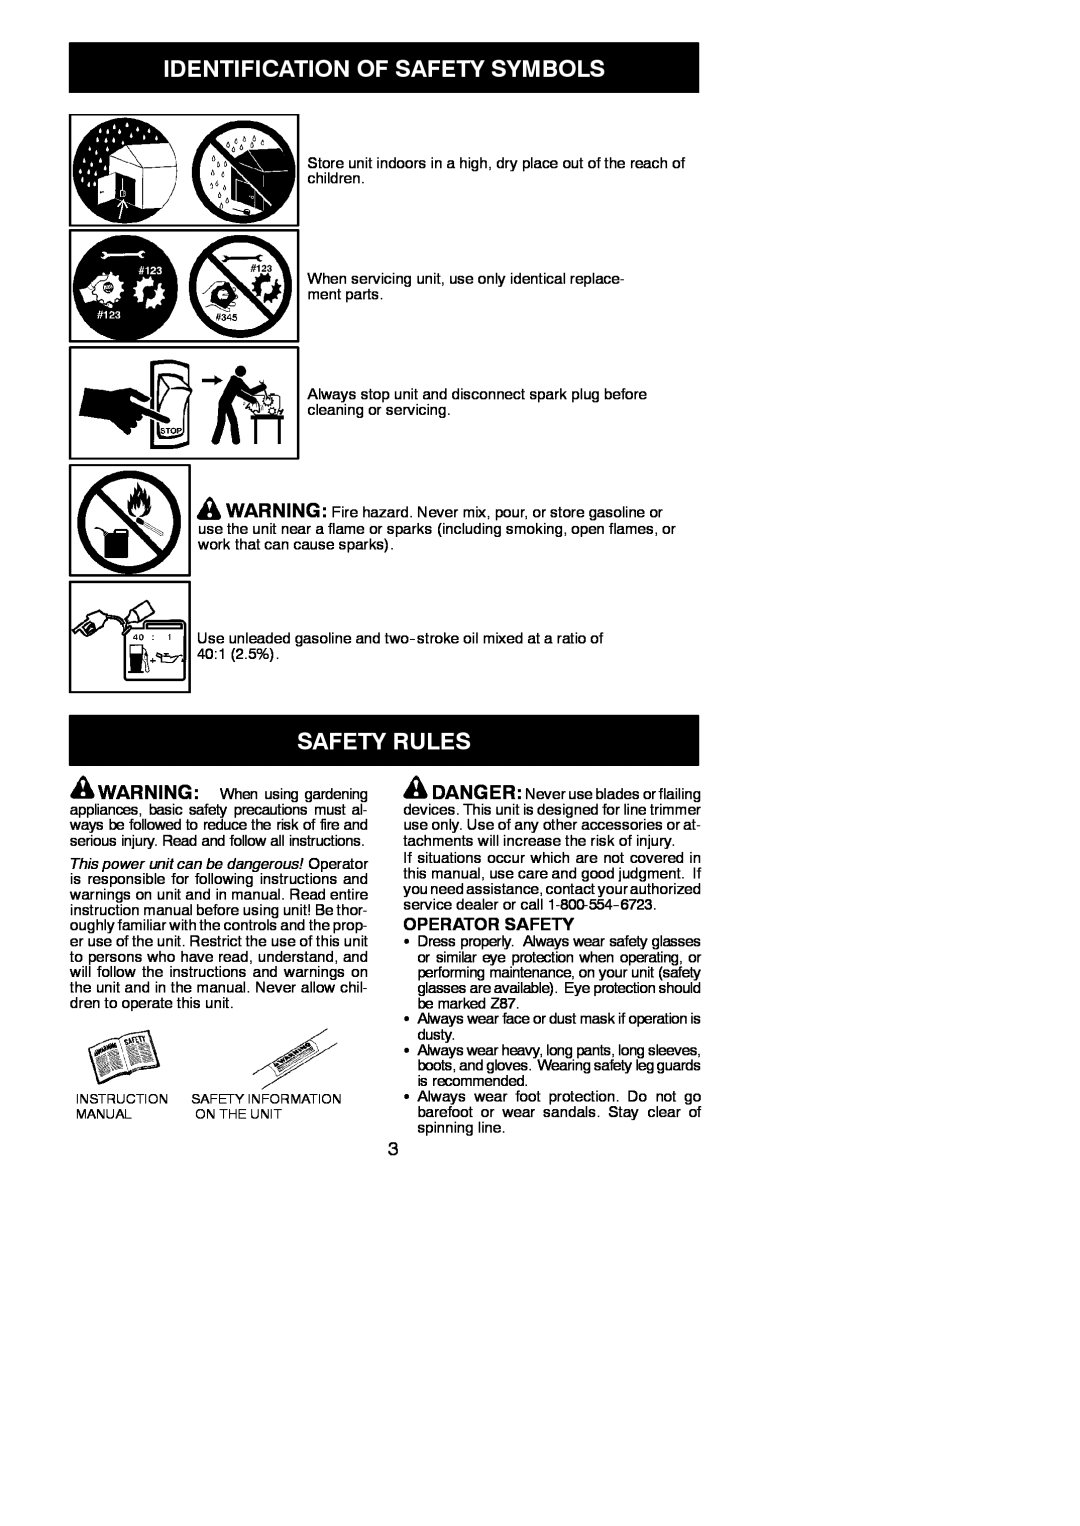 Weed Eater 545186833 instruction manual Safety Rules, Identification Of Safety Symbols, Operator Safety 